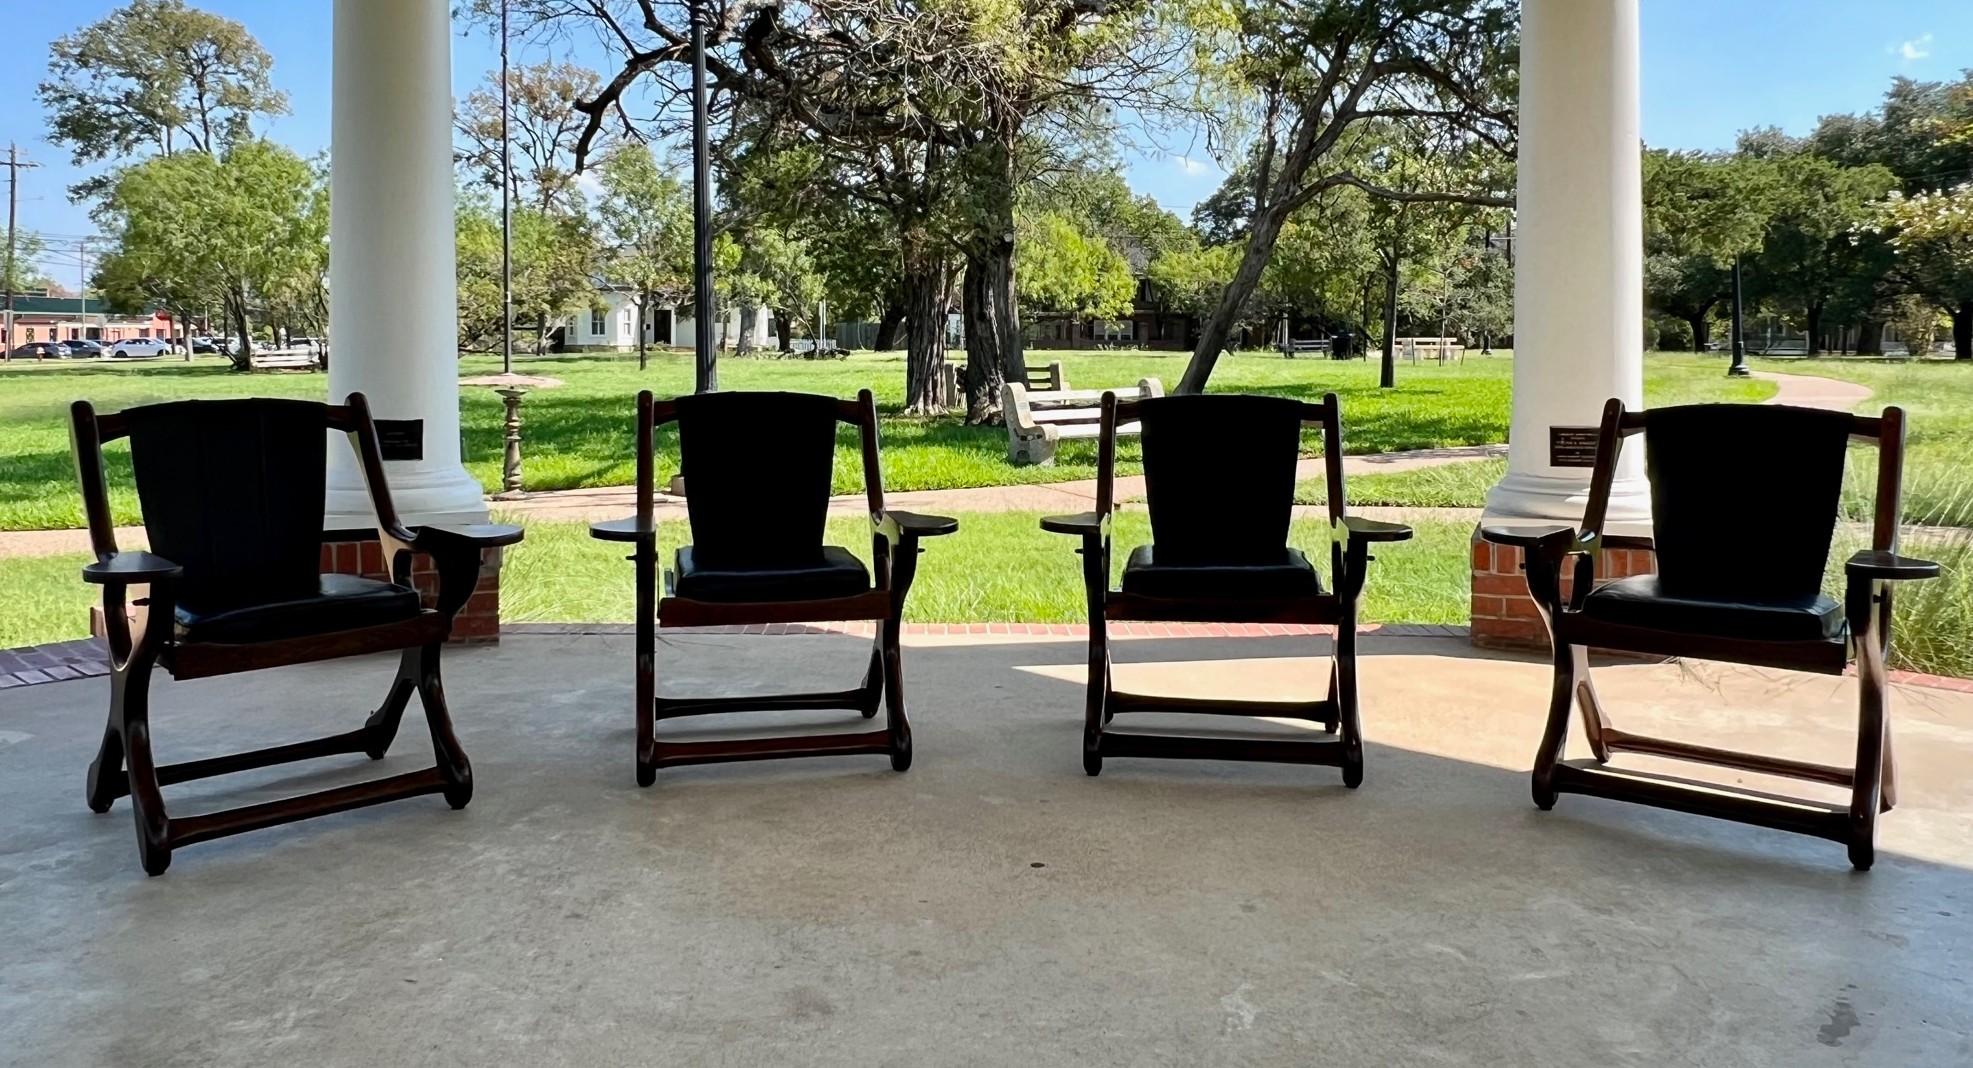 Mid-Century Mexican Modern Don Shoemaker Senal SA Sling Swinger Chairs Set of 4 For Sale 11